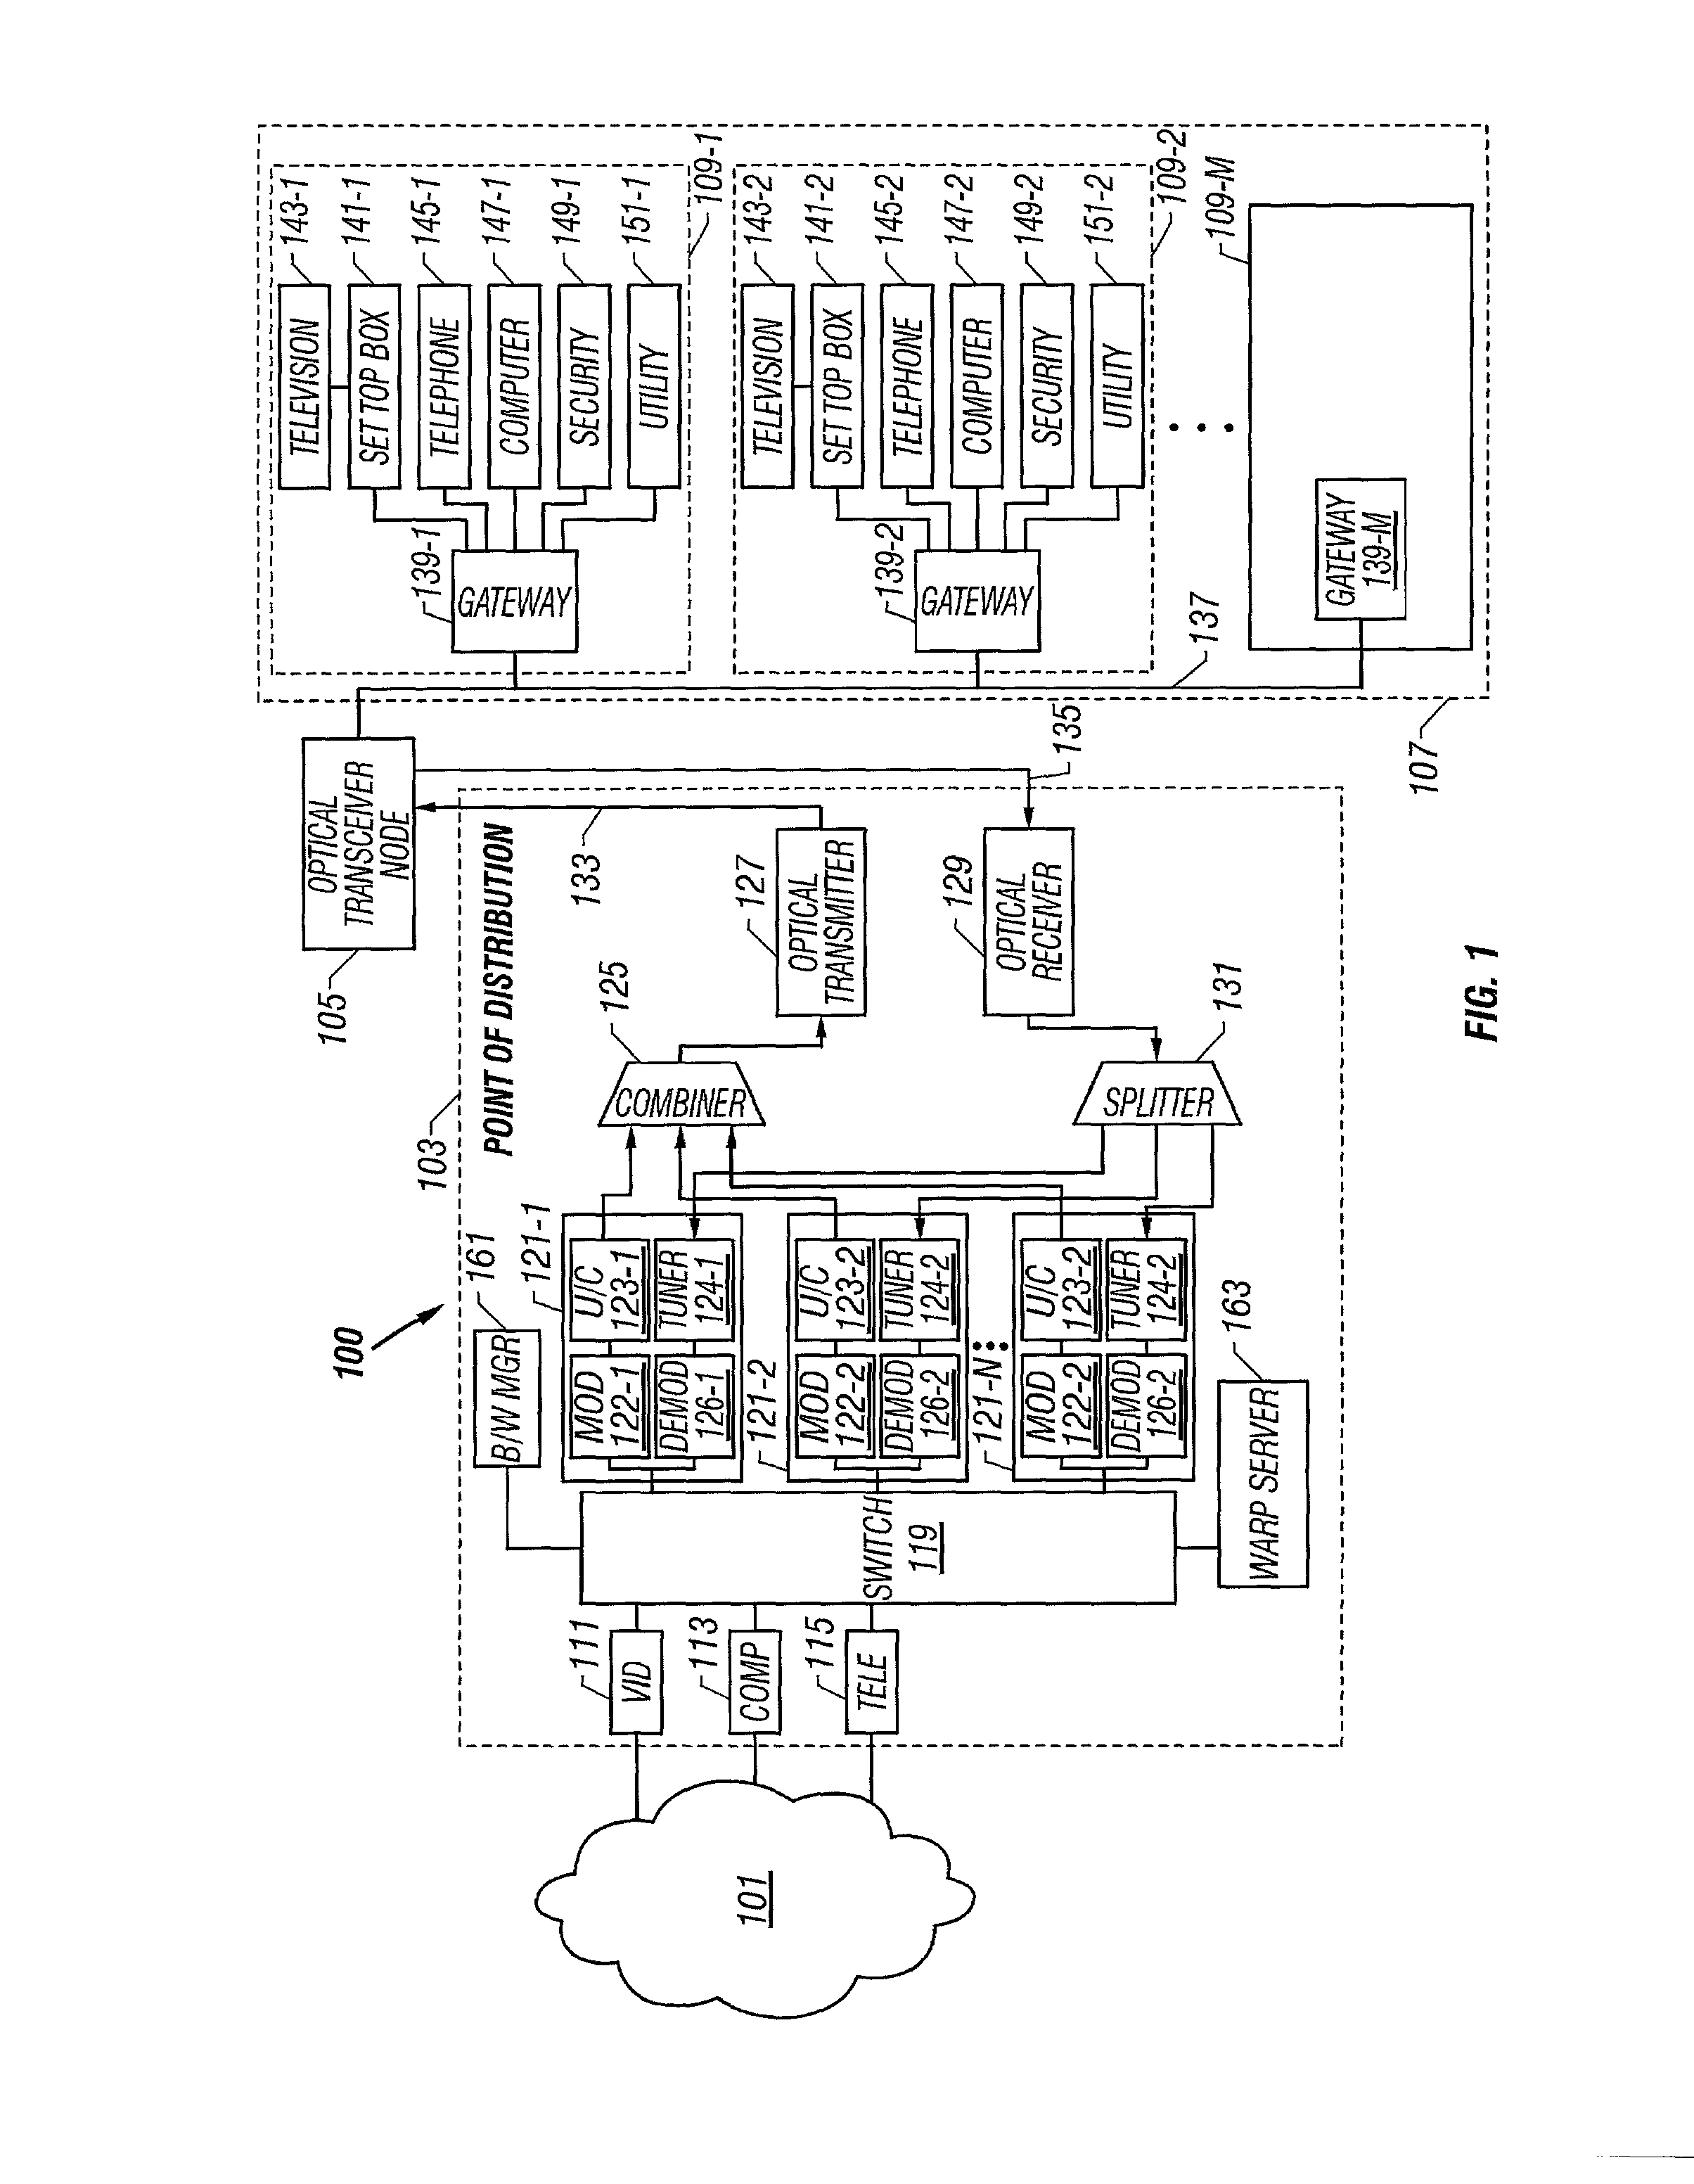 System and method for distributing information via a communication network